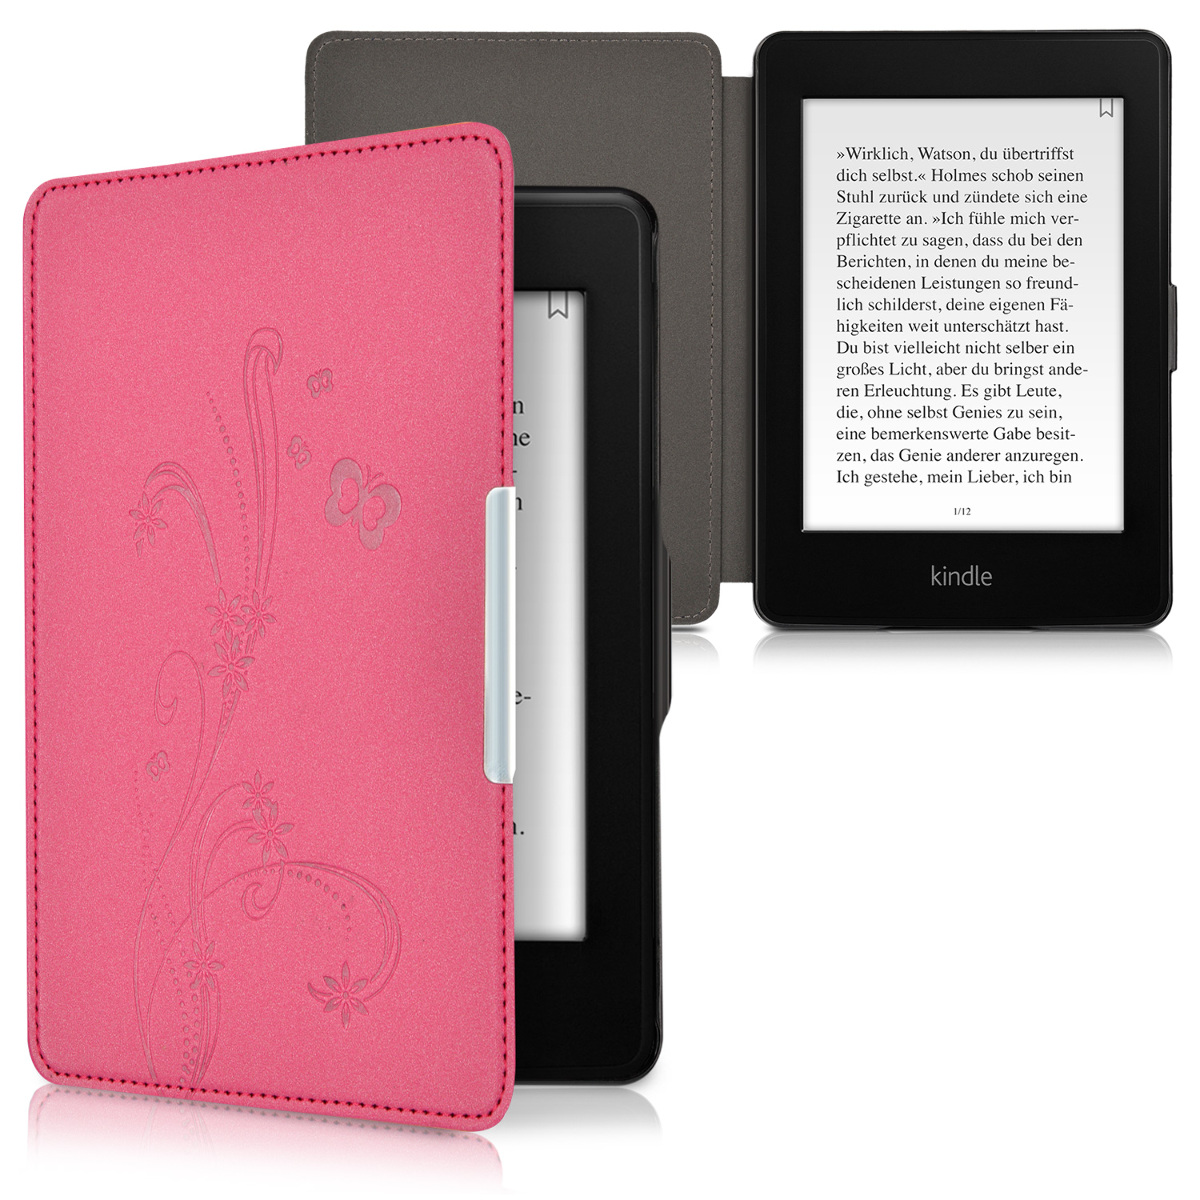 kindle paperwhite cover